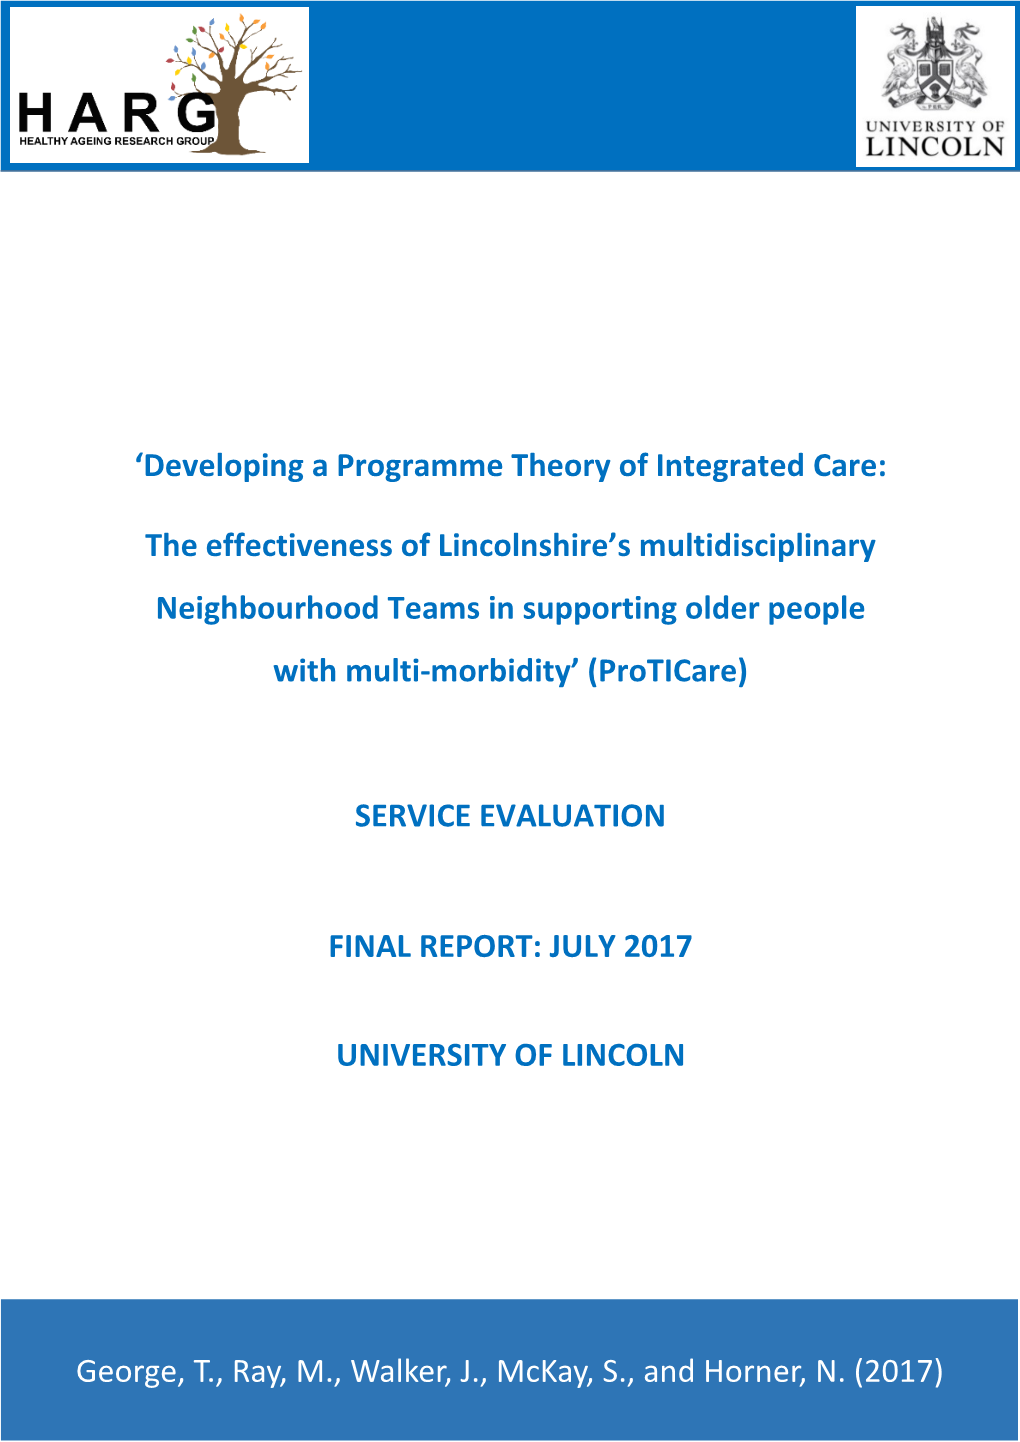 'Developing a Programme Theory of Integrated Care: the Effectiveness